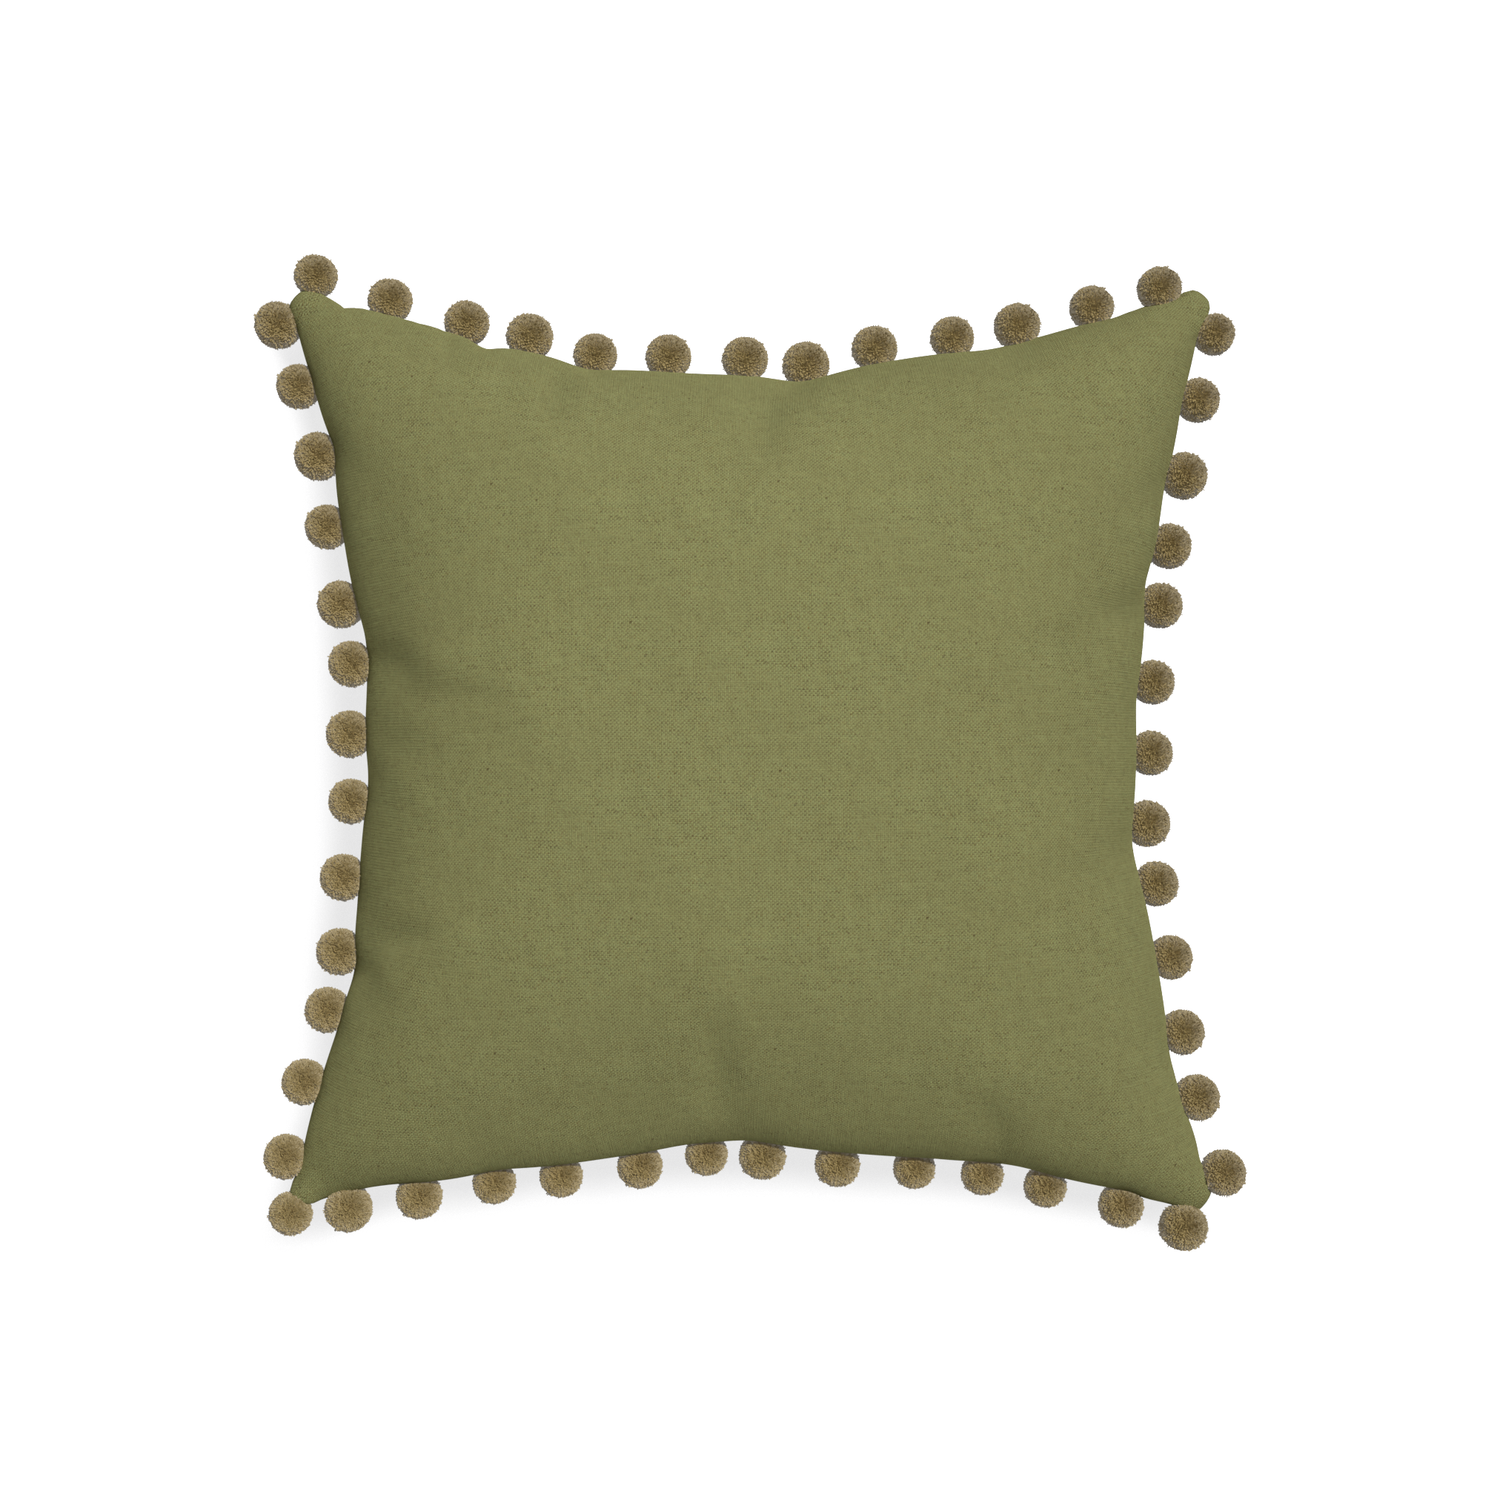 20-square moss custom moss greenpillow with olive pom pom on white background